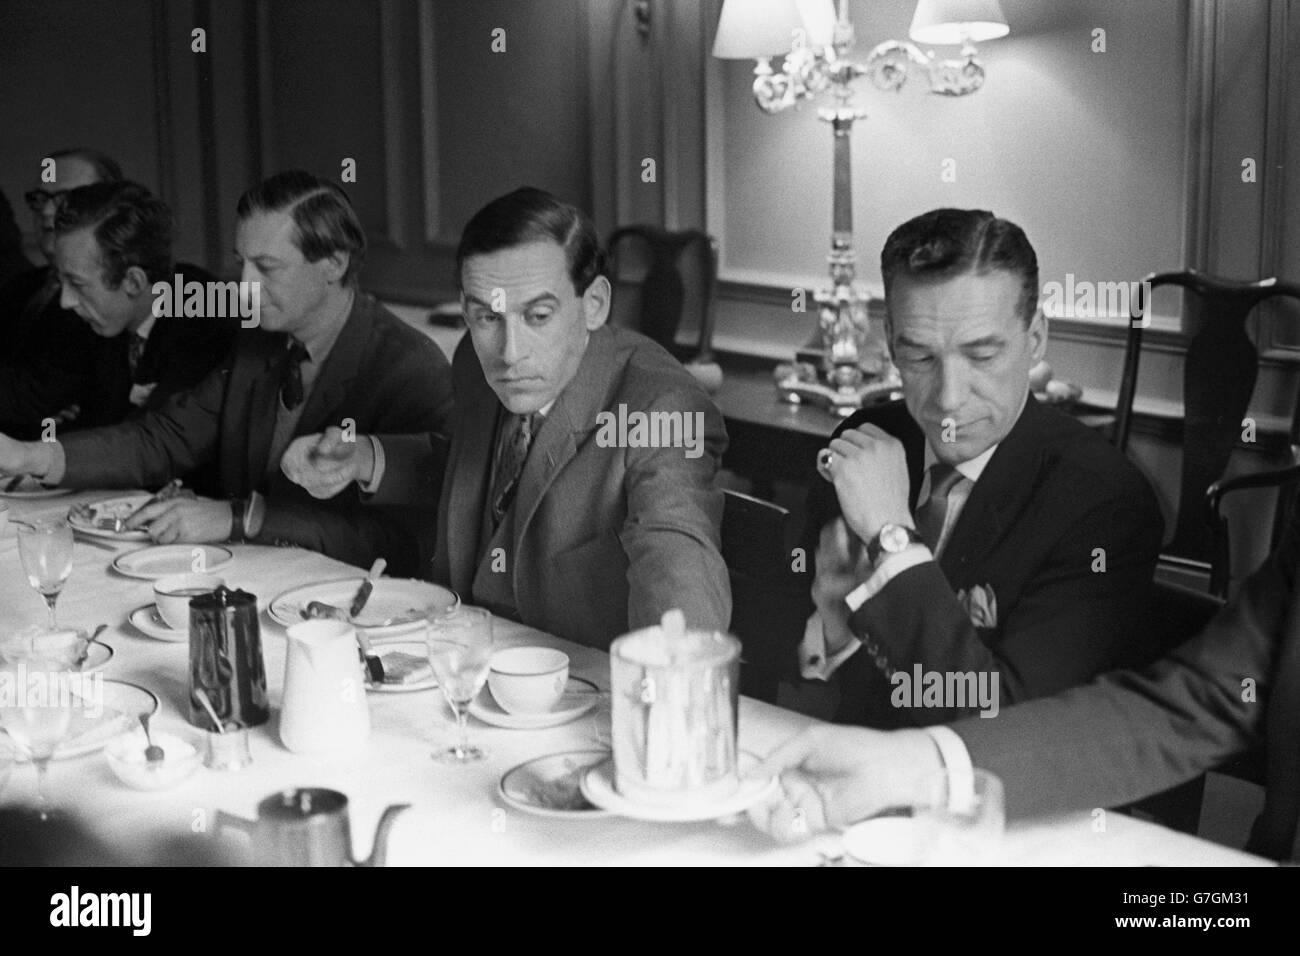 Liberal leader Jeremy Thorpe passes the cream jug down the table during a breakfast meeting of Liberal Party members at the Reform Club in Pall Mall. Stock Photo